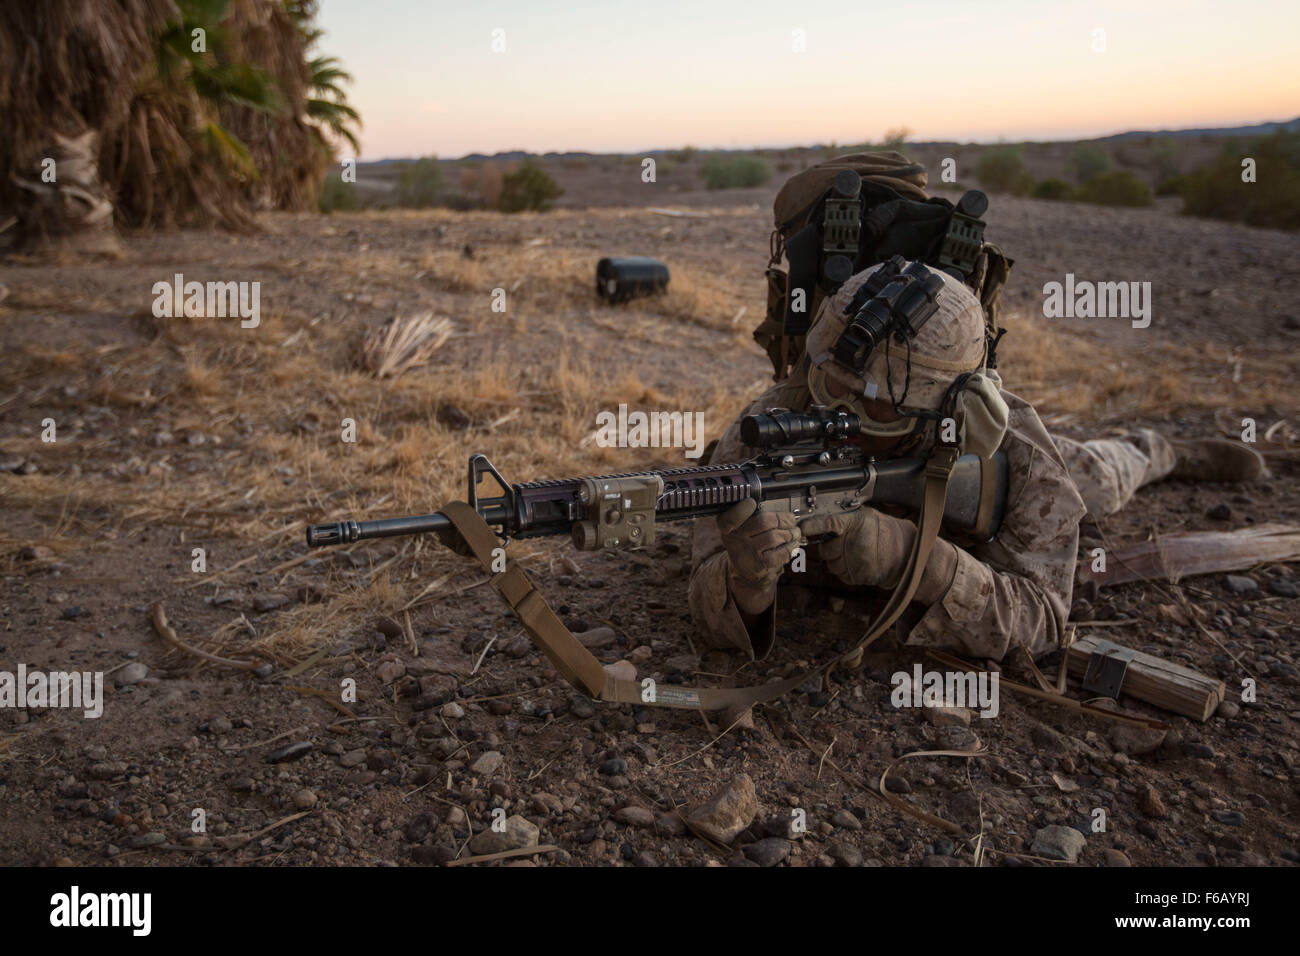 U.S. Marine Corps Lance Cpl. Eduardo Gomez with 2nd Battalion, 7th Marine Regiment, 1st Marine Division, provides security during a Heavy Huey Raid at K-9 Village, Yuma Proving Grounds, Yuma, Ariz., Oct. 7, 2015. This exercise was part of the Weapons and Tactics Instructor (WTI) 1-16, a seven week training event, hosted by Marine Aviation Weapons and Tactics Squadron One (MAWTS-1) cadre, which emphasizes operational integration of the six functions of Marine Corps aviation in support of a Marine Corps Air Ground Task Force. MAWTS-1 provides standardized advanced tactical training and certifica Stock Photo